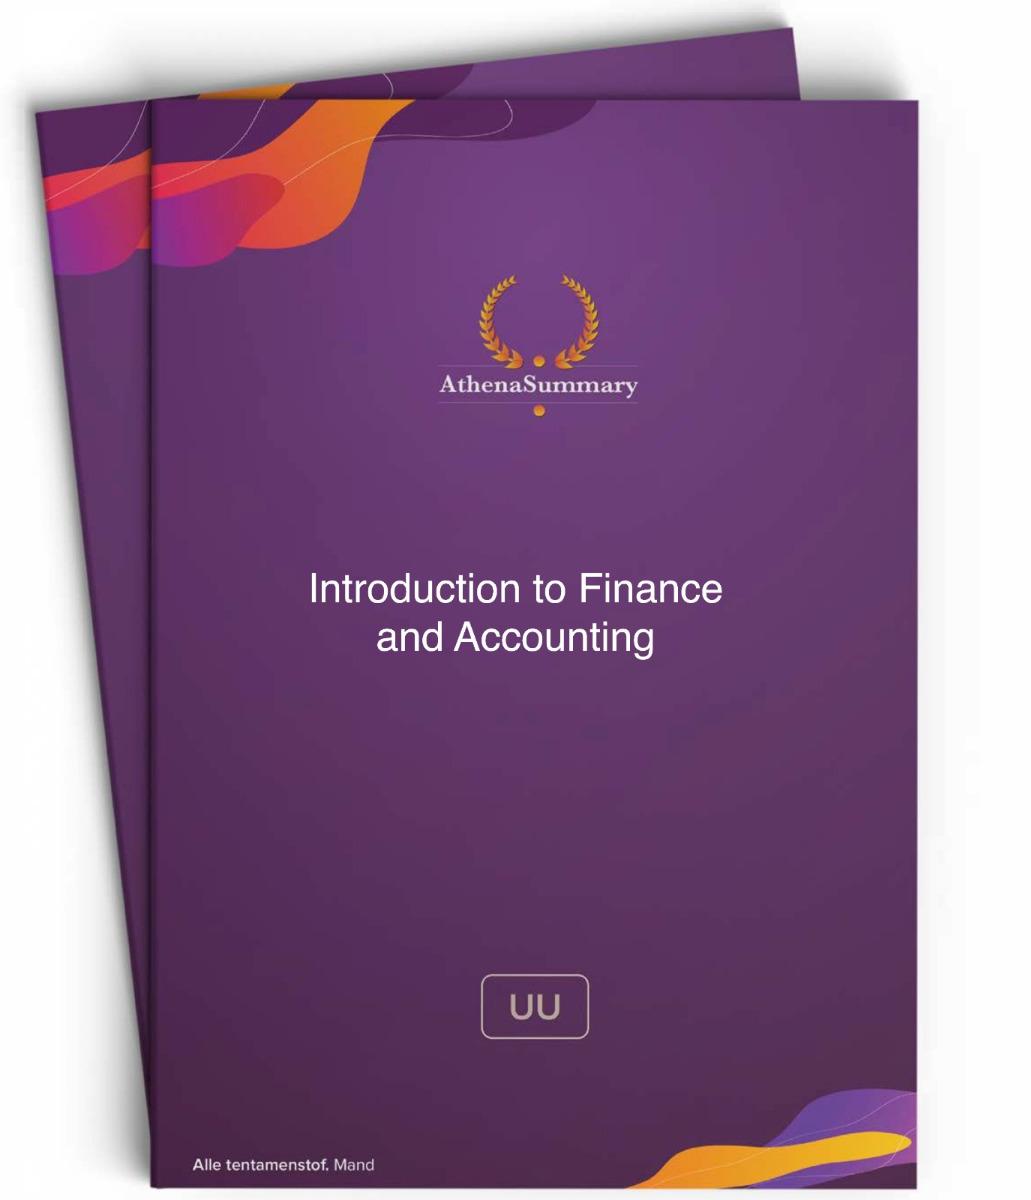 Literature Summary: Introduction to Finance and Accounting